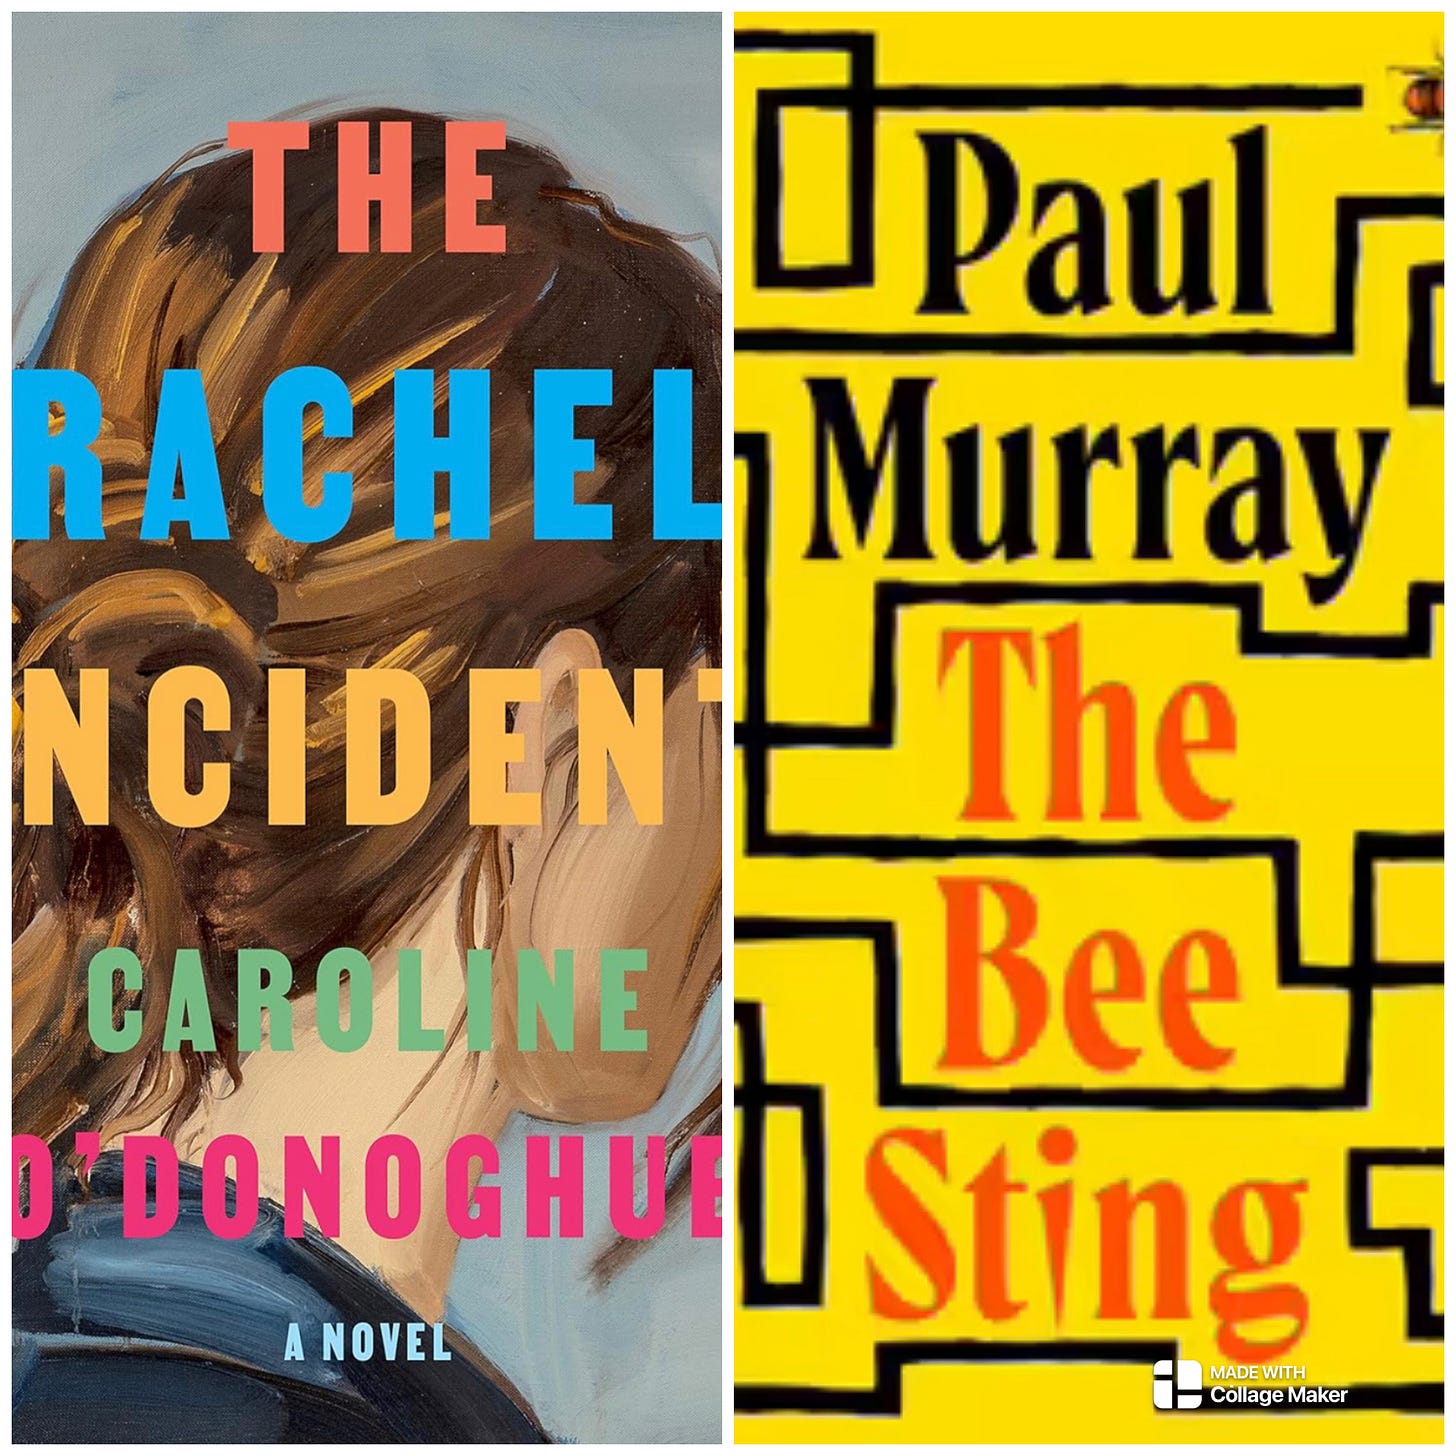 Image of the cover of The Rachel Incident, featuring a painting of a woman looking away, next to the Cover of The Bee Sting, a bright yellow cover with black lines drawn over it 